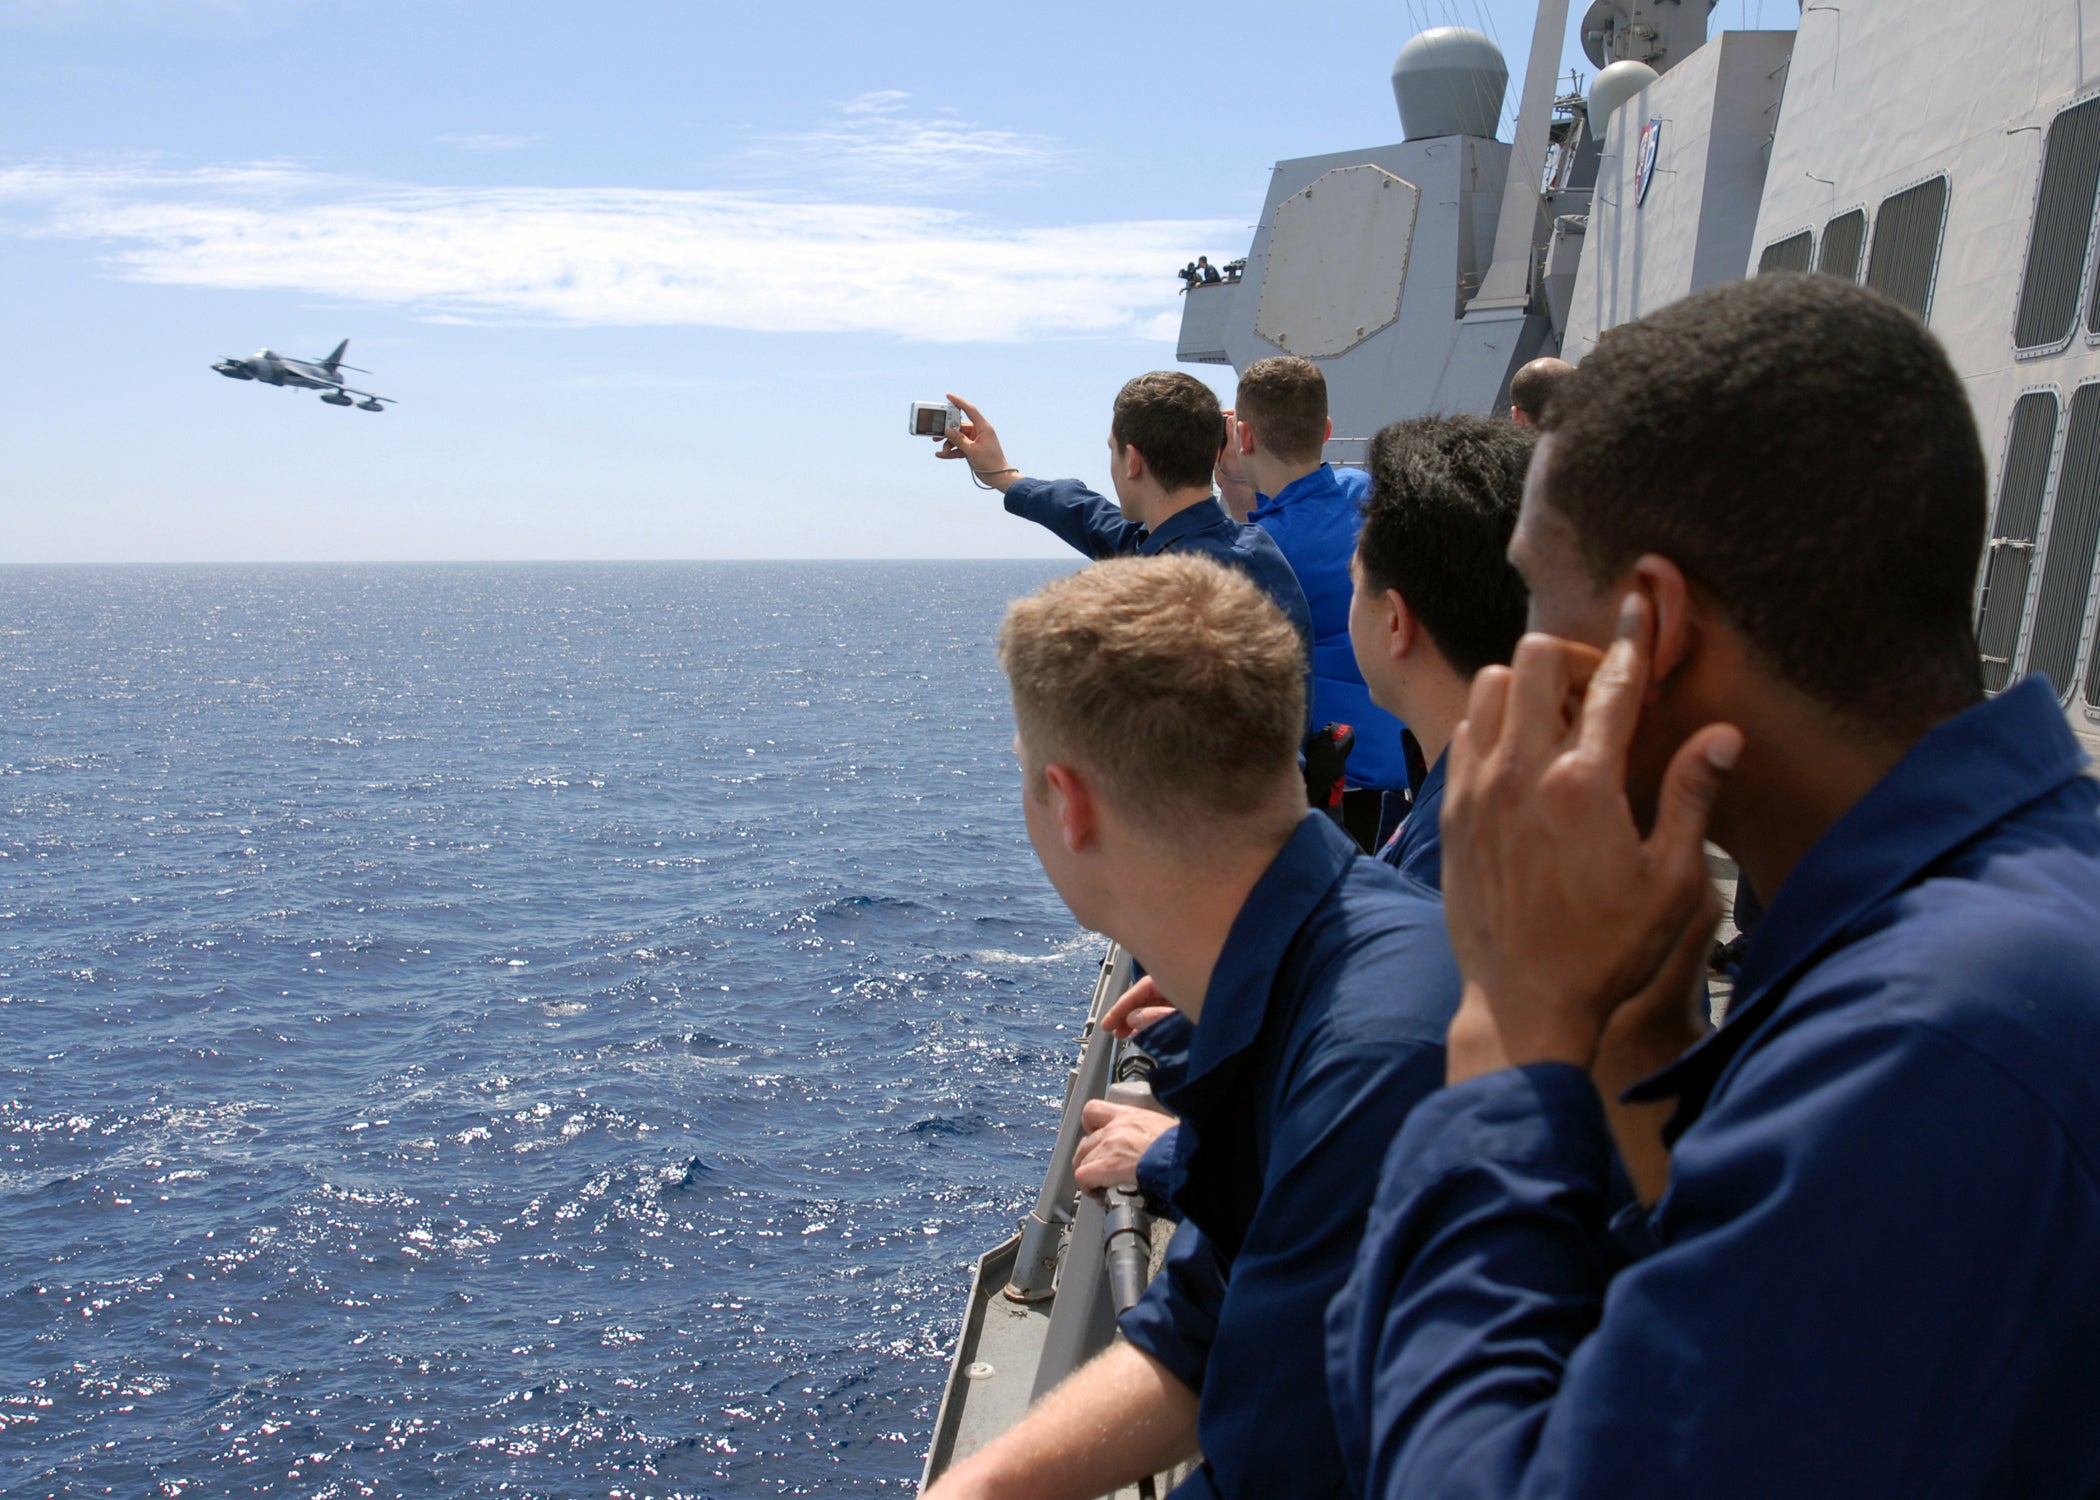 Sailors aboard the Arleigh Burke class guided missile destroyer USS Mustin gather around the rails to watch a Hawker Hunter training aircraft fly by the ship. Mustin is deployed with Destroyer Squadron 15.